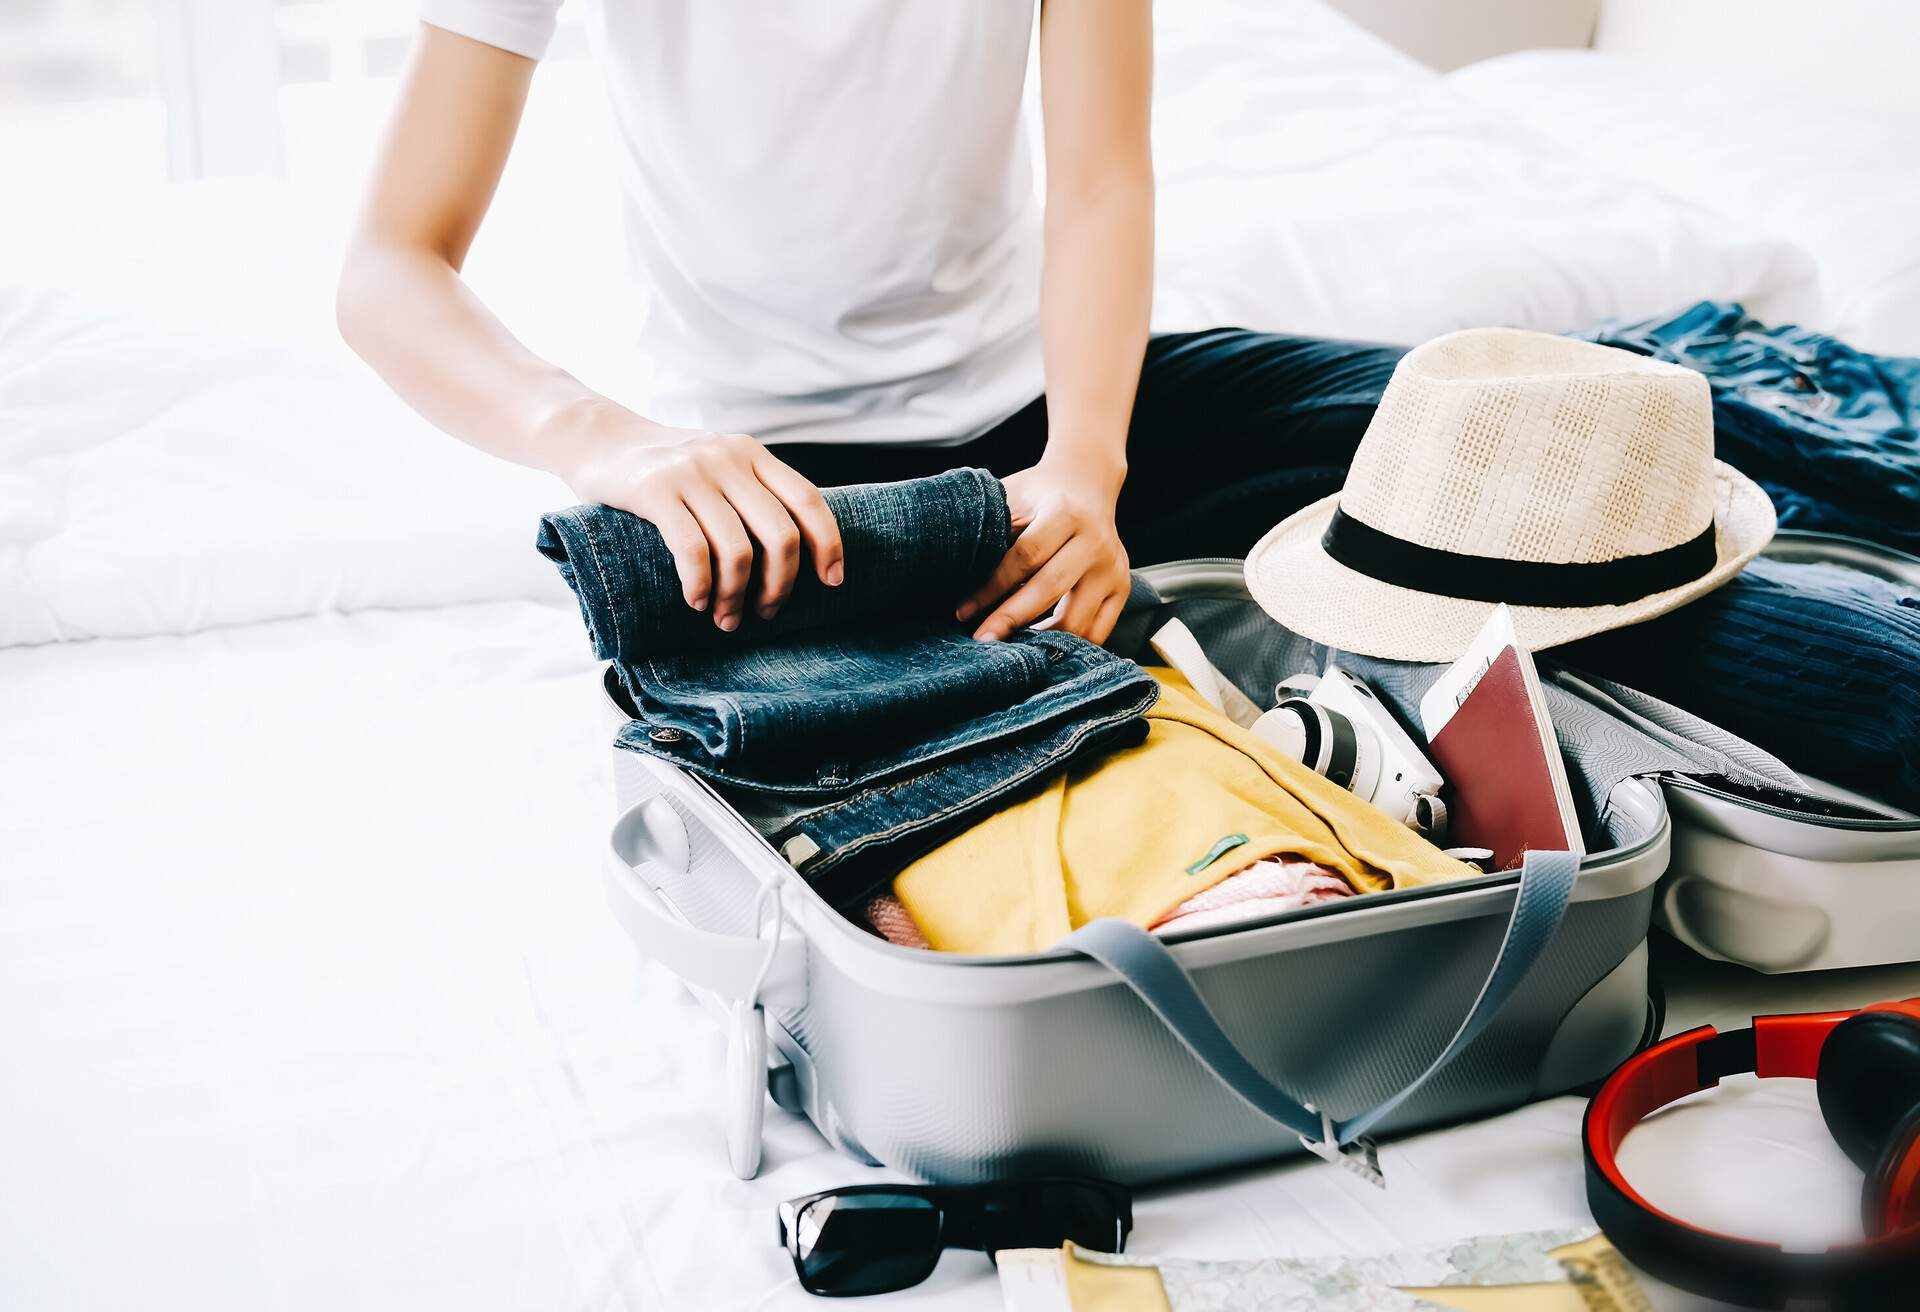 A woman packing her suitcase with clothes, hat, and other travel essentials.